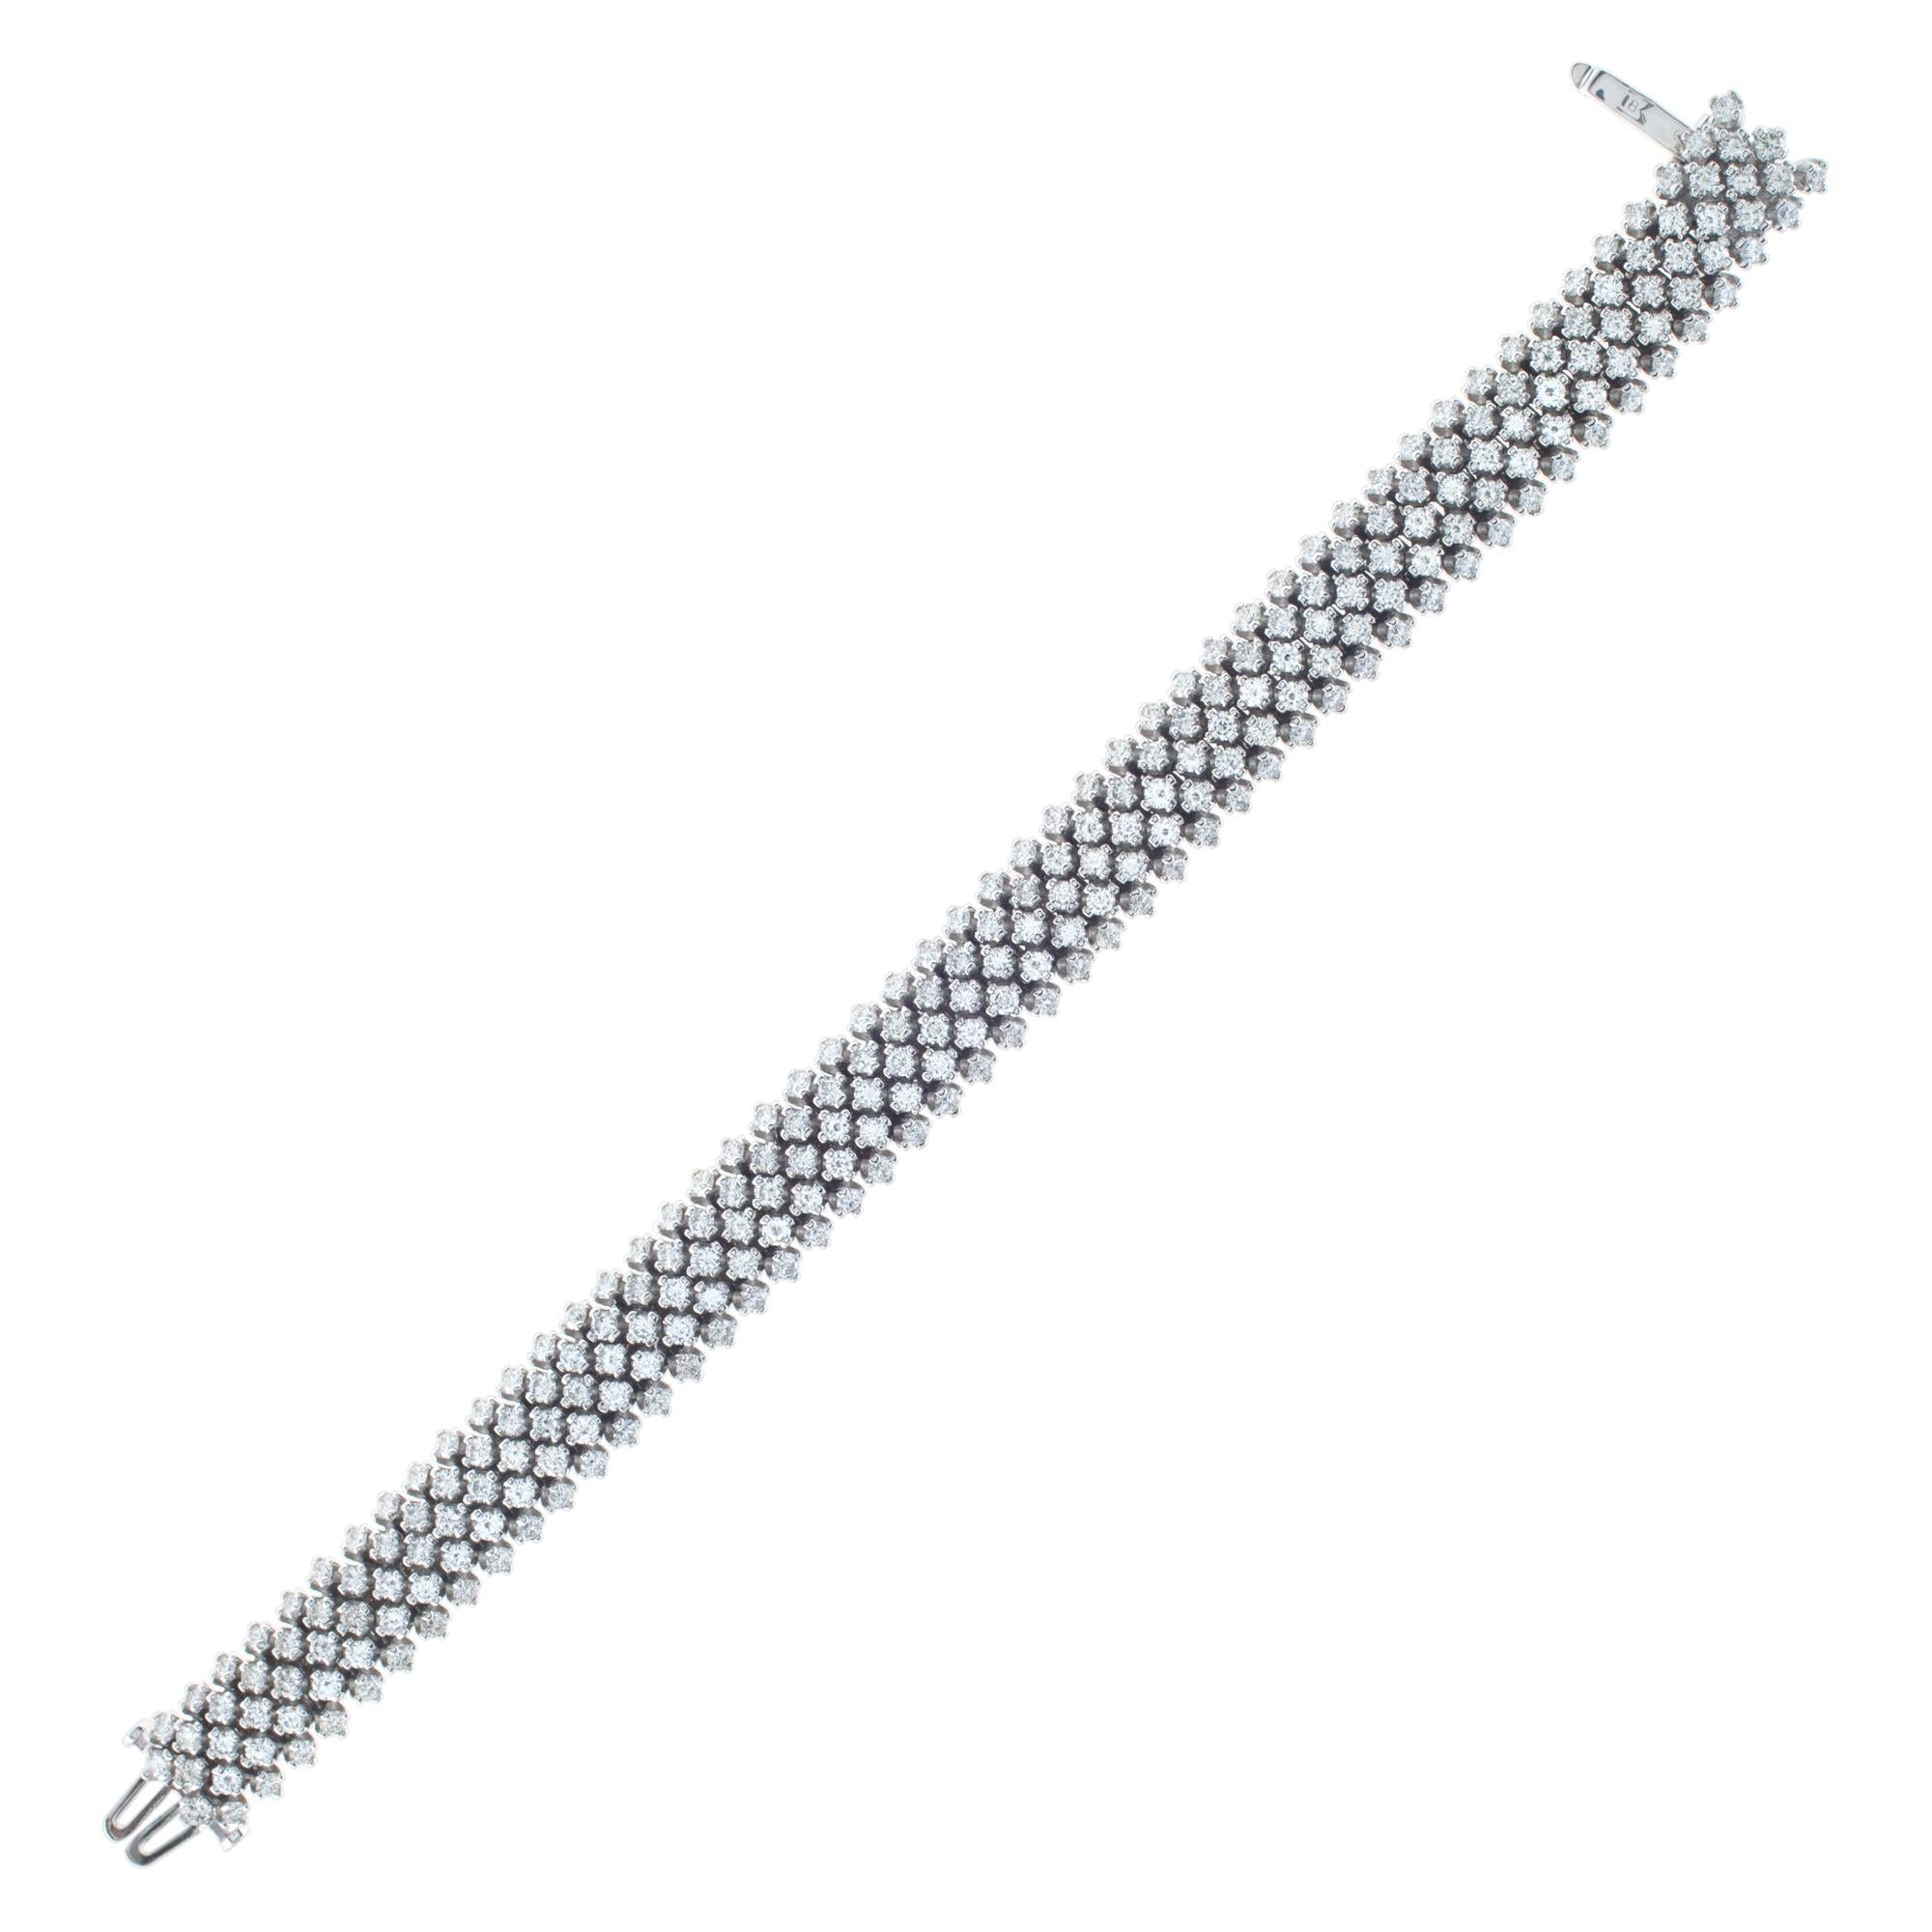 Stunning 5 rows diamond line bracelet in 18k white gold. 258 full cut round brilliant diamonds total weight over 9 carats, estimate: G-H color, VS-SI clarity. Length: 6.75'', width: 11mm.